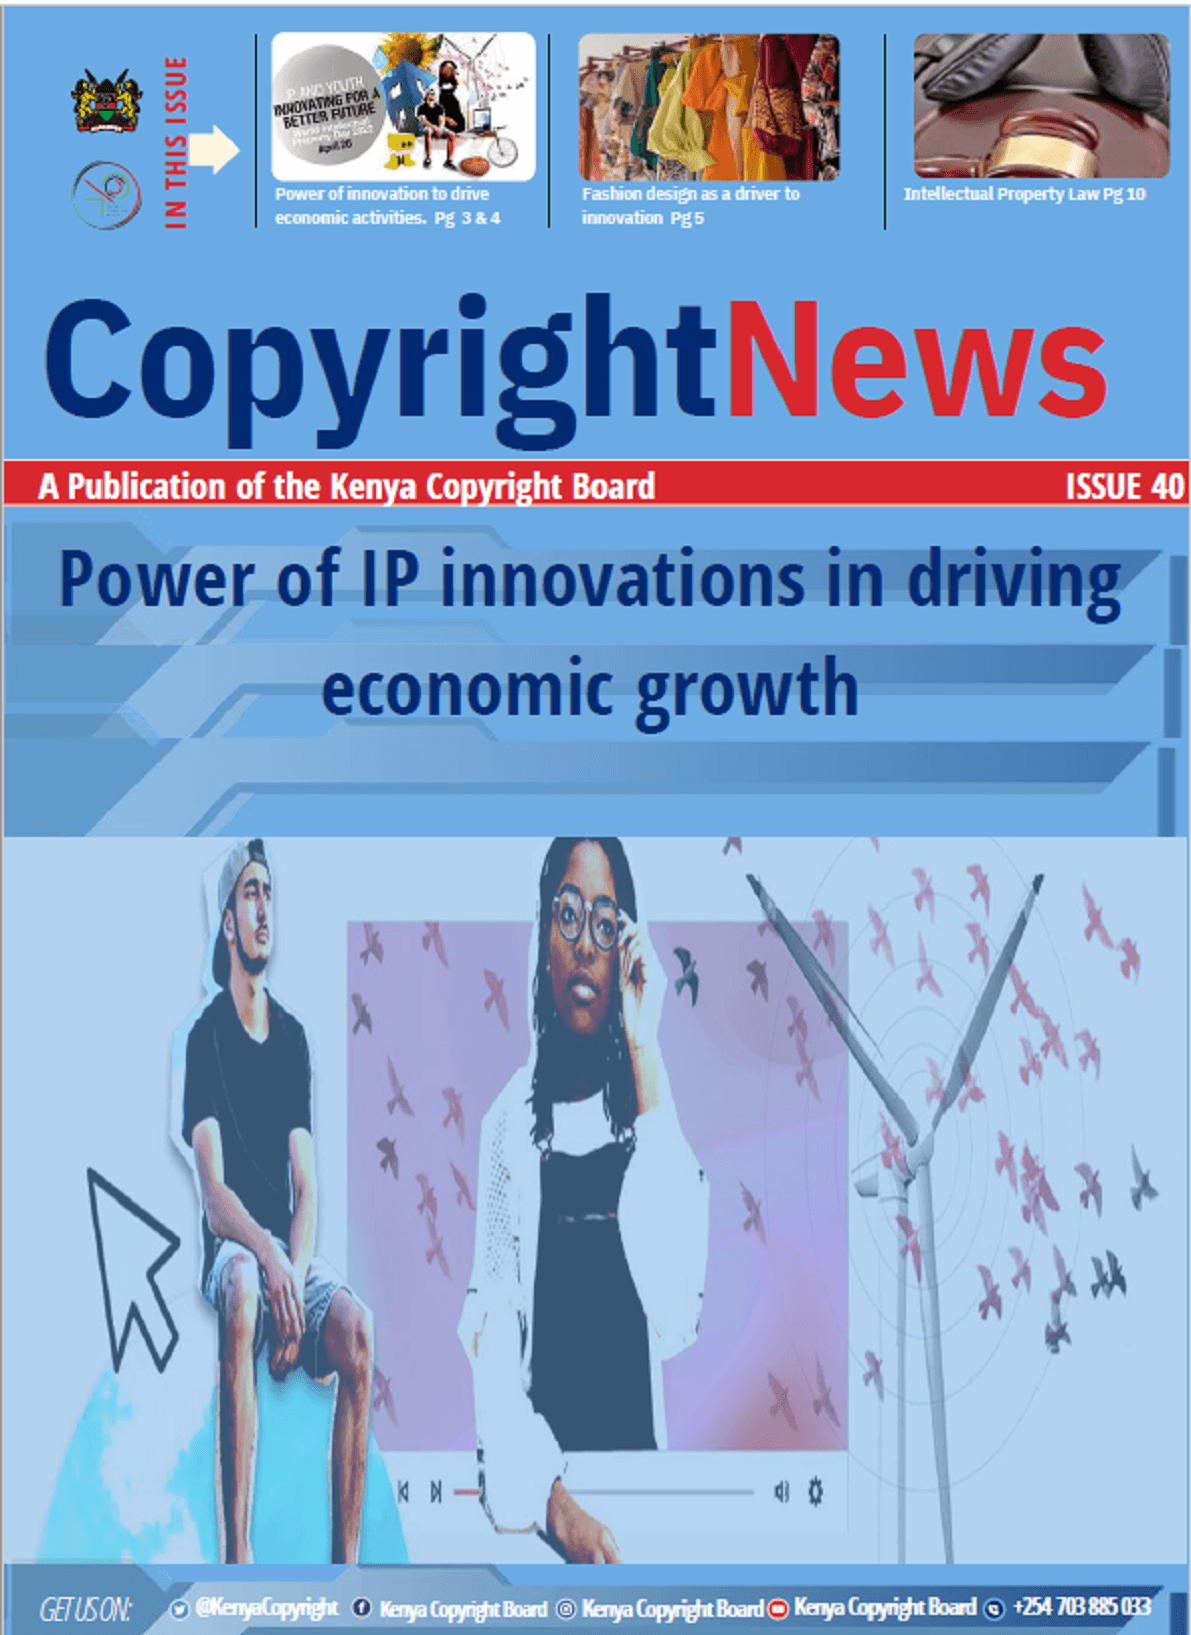 Power of IP innovations in driving economic